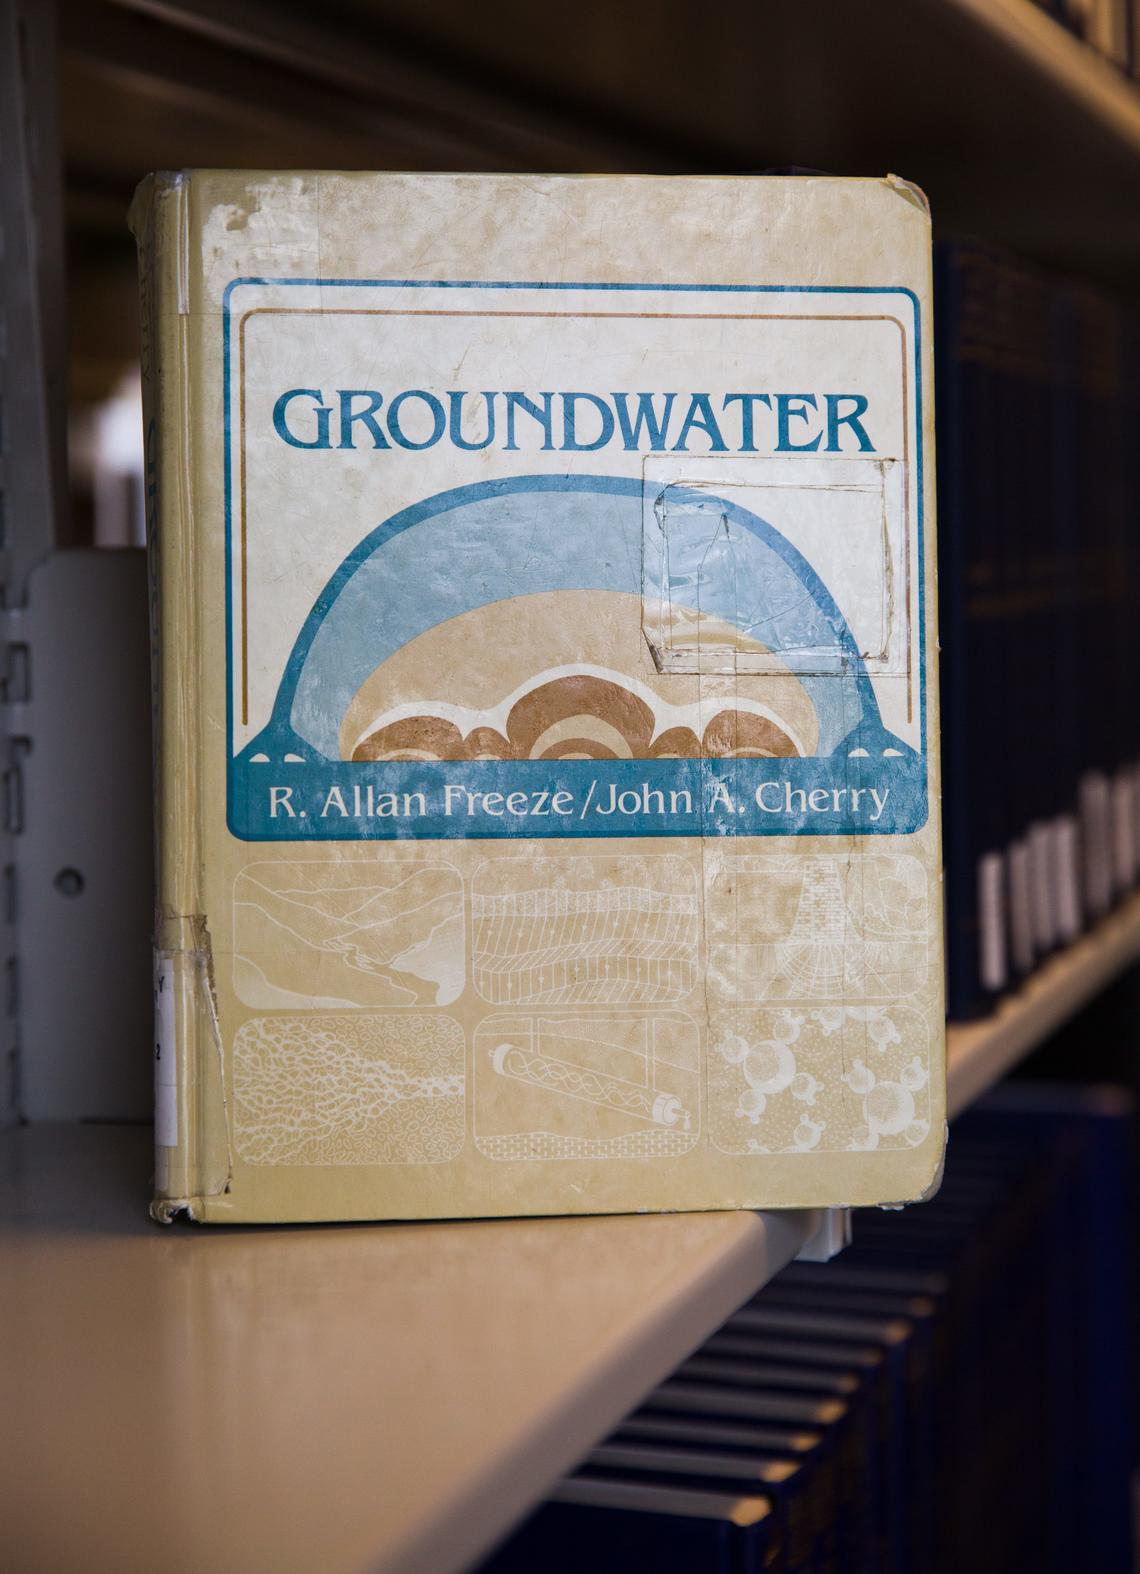 The web version of Groundwater will help communicate advanced groundwater science to groups in developing countries.